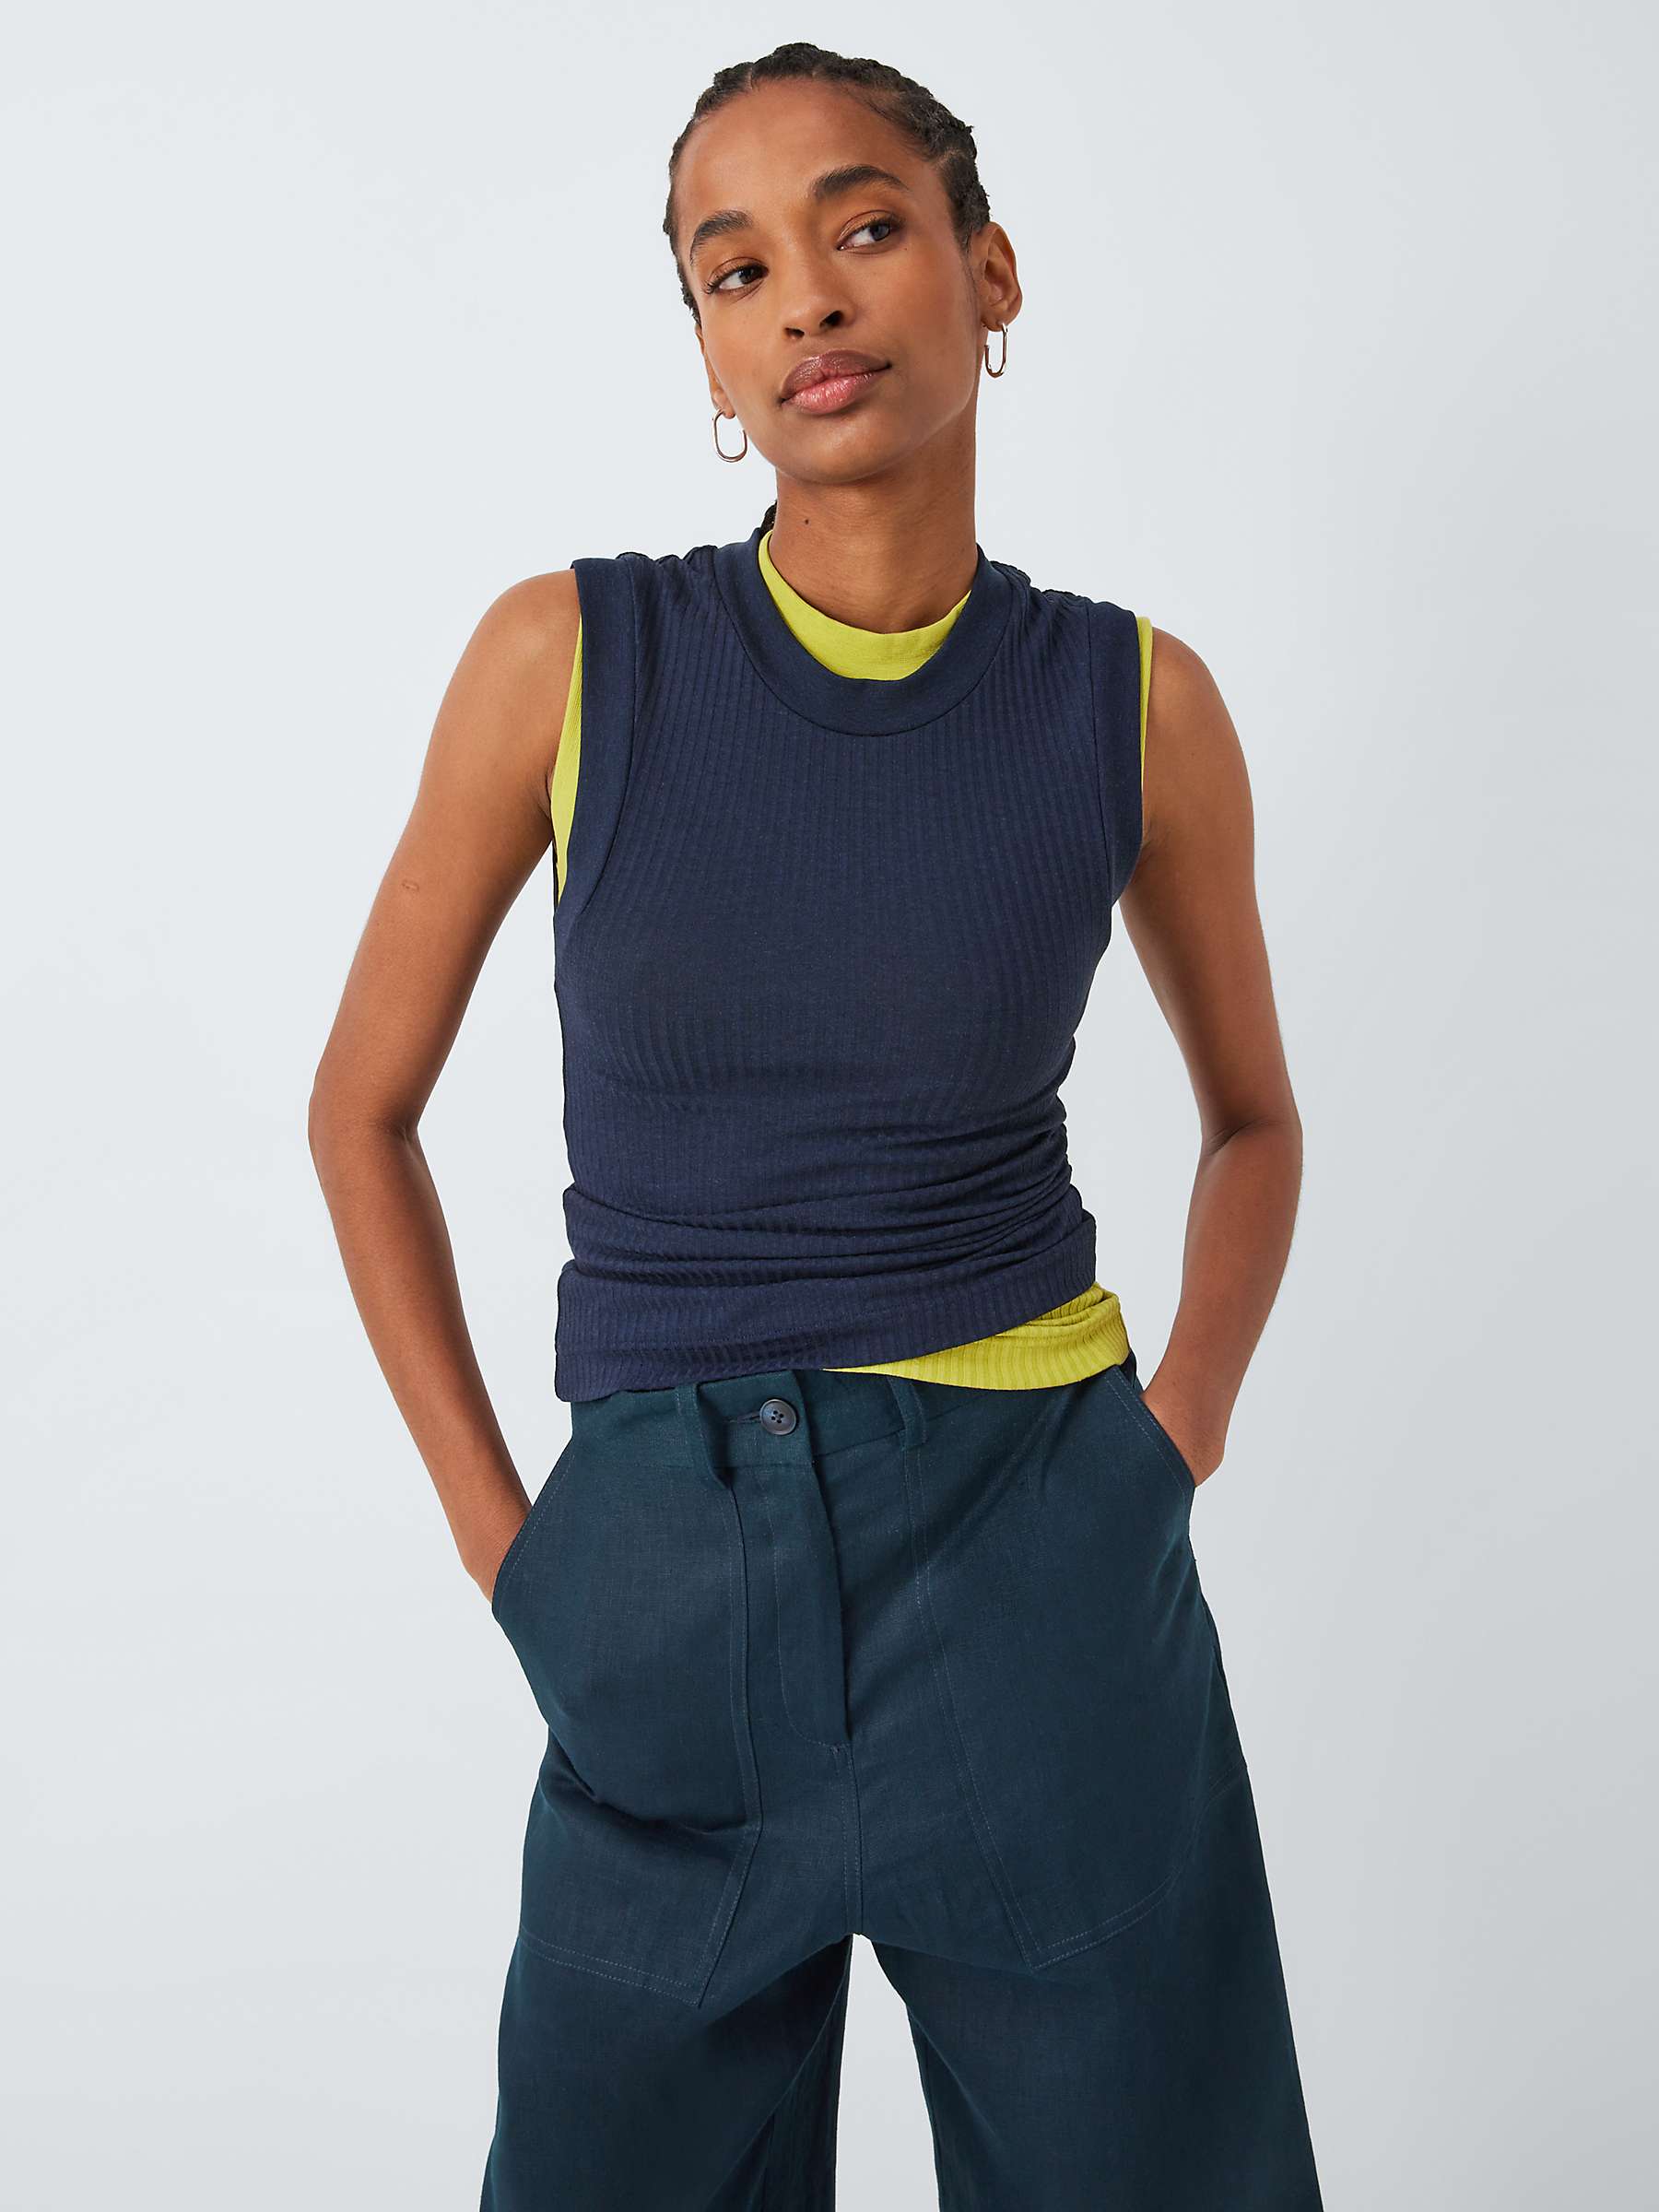 Buy John Lewis Cropped Linen Trousers Online at johnlewis.com